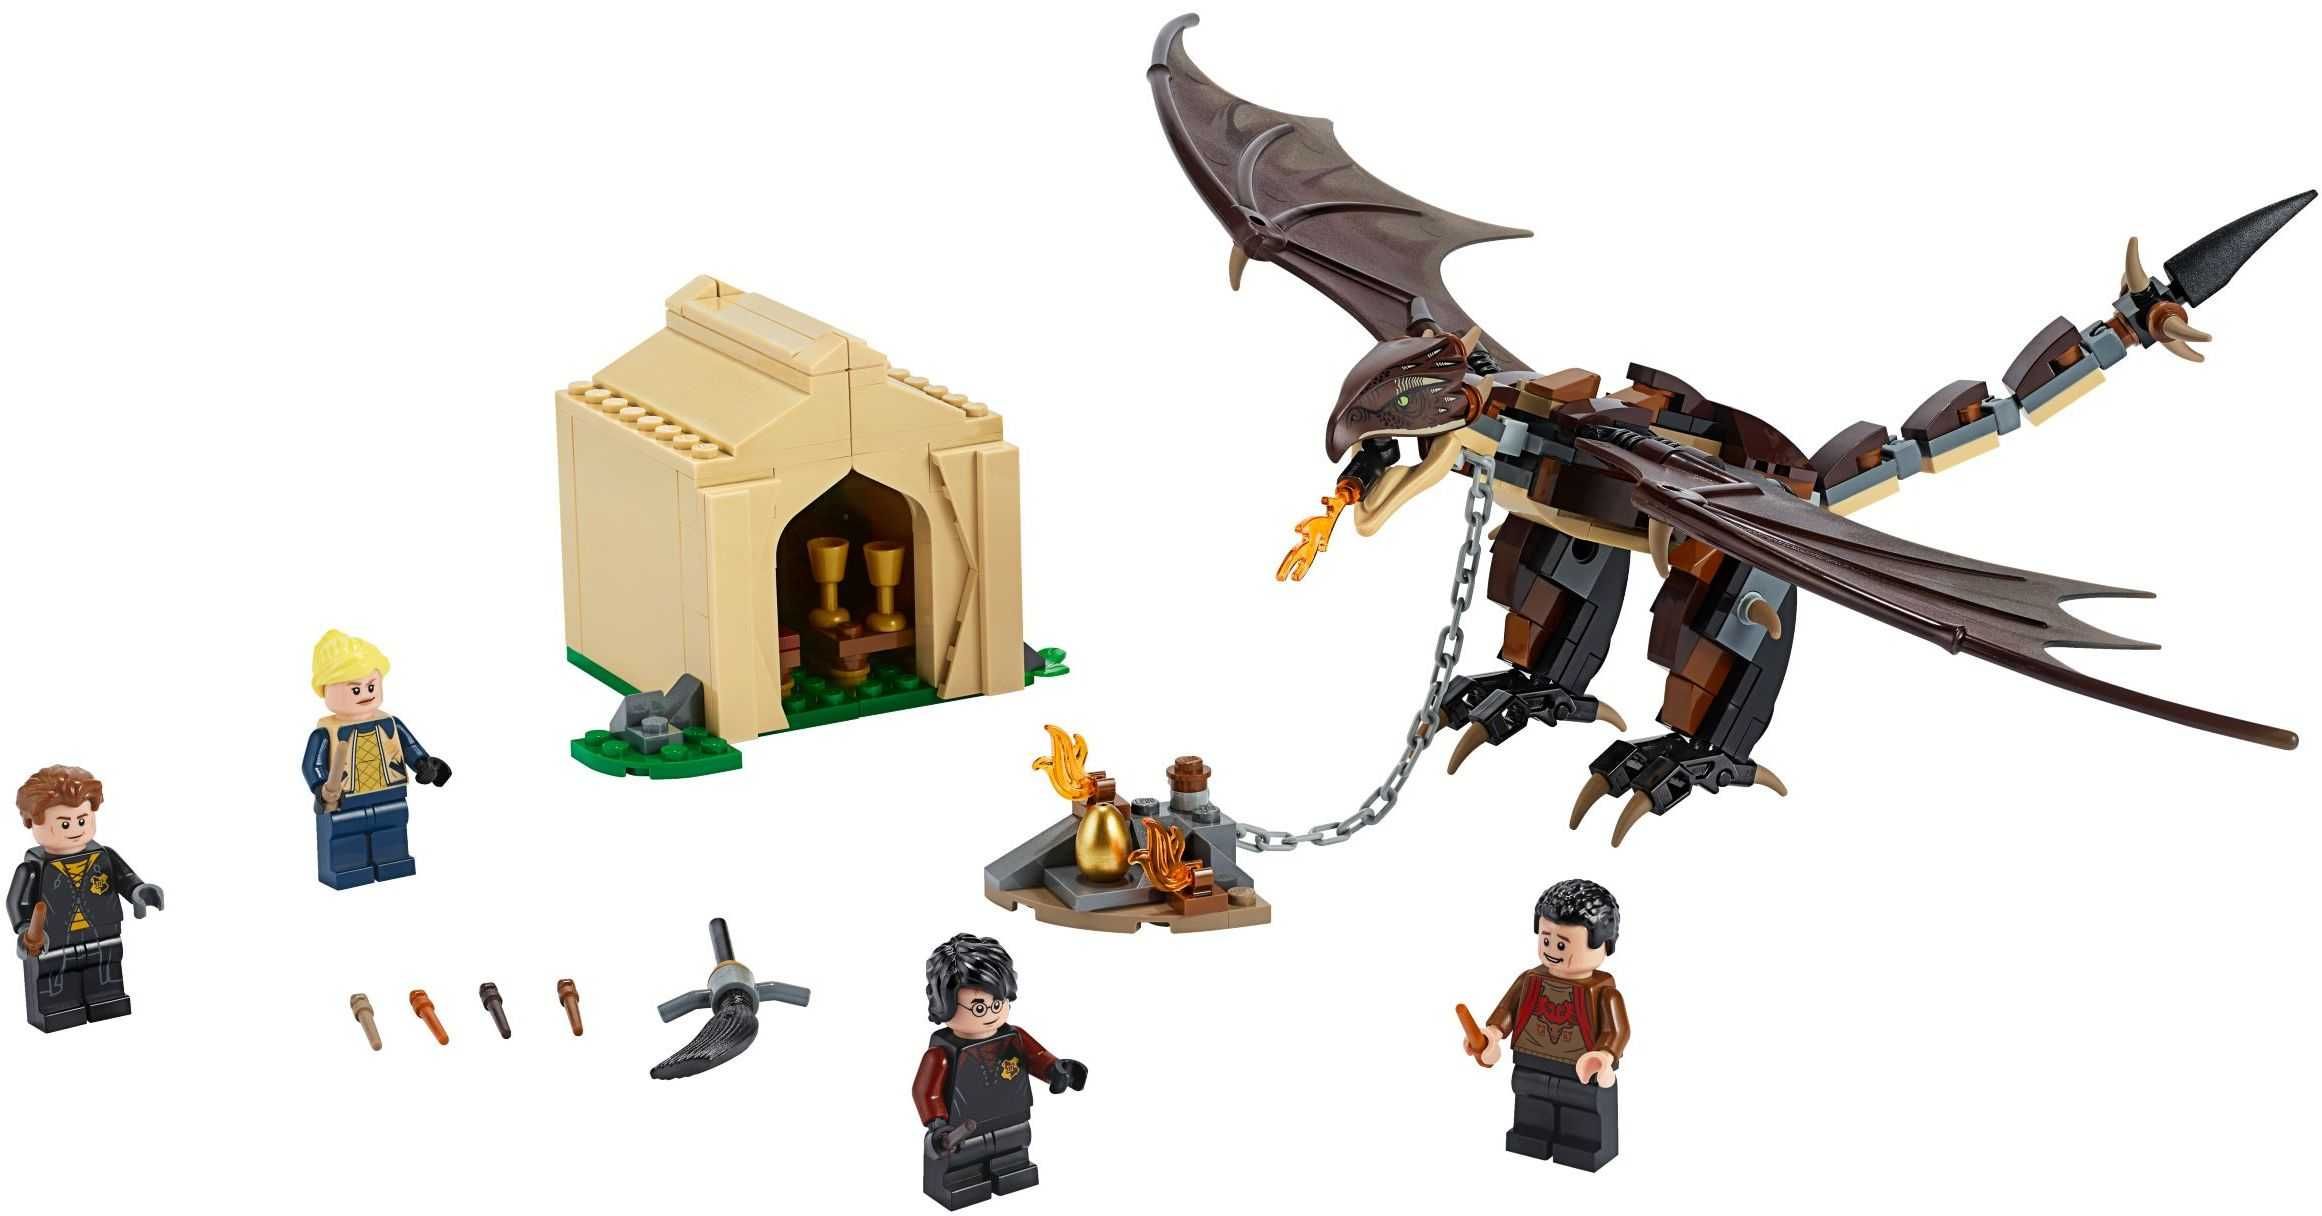 LEGO Harry Potter 75946 : Hungarian Horntail Triwizard Challenge -NOU